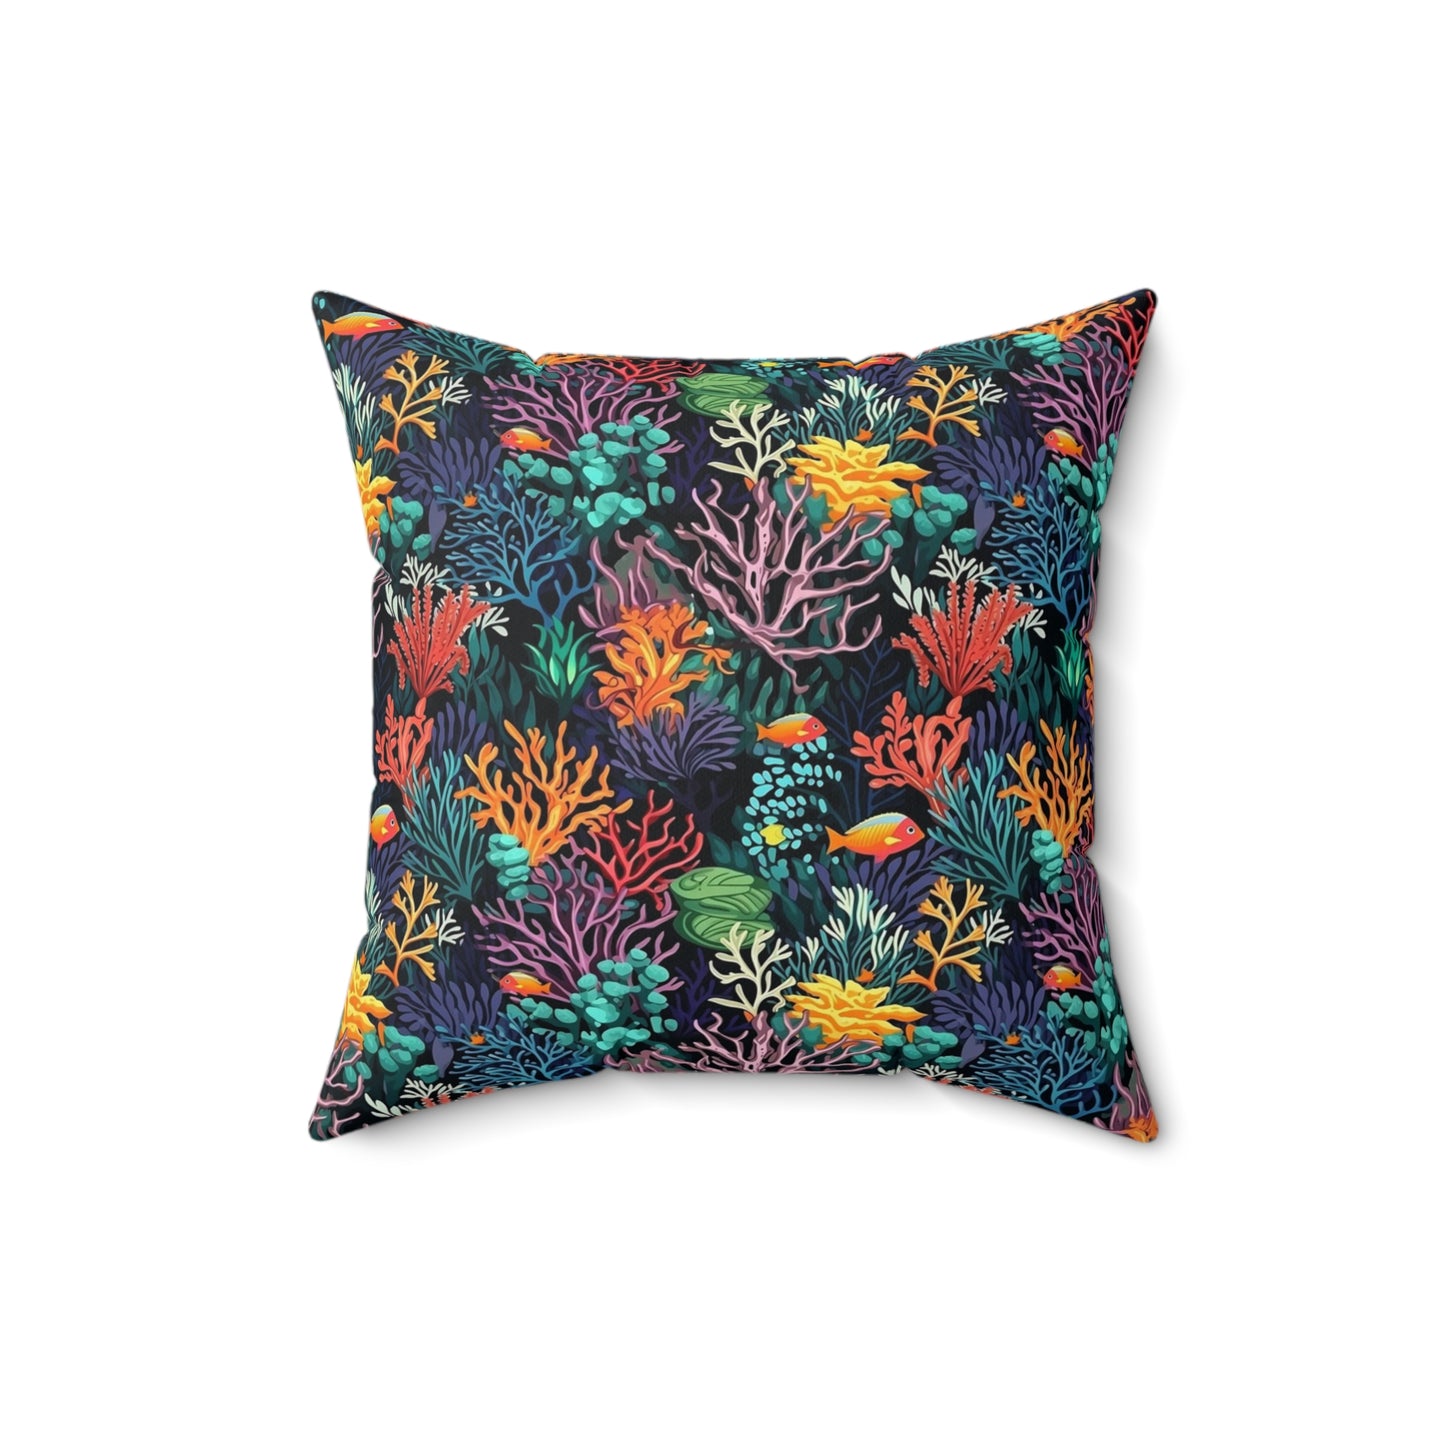 Coral Reef Filled Pillow with Insert, Coastal Ocean Tropical Fish Beach Square Throw Accent Decorative Room Decor Floor Sofa Couch Cushion